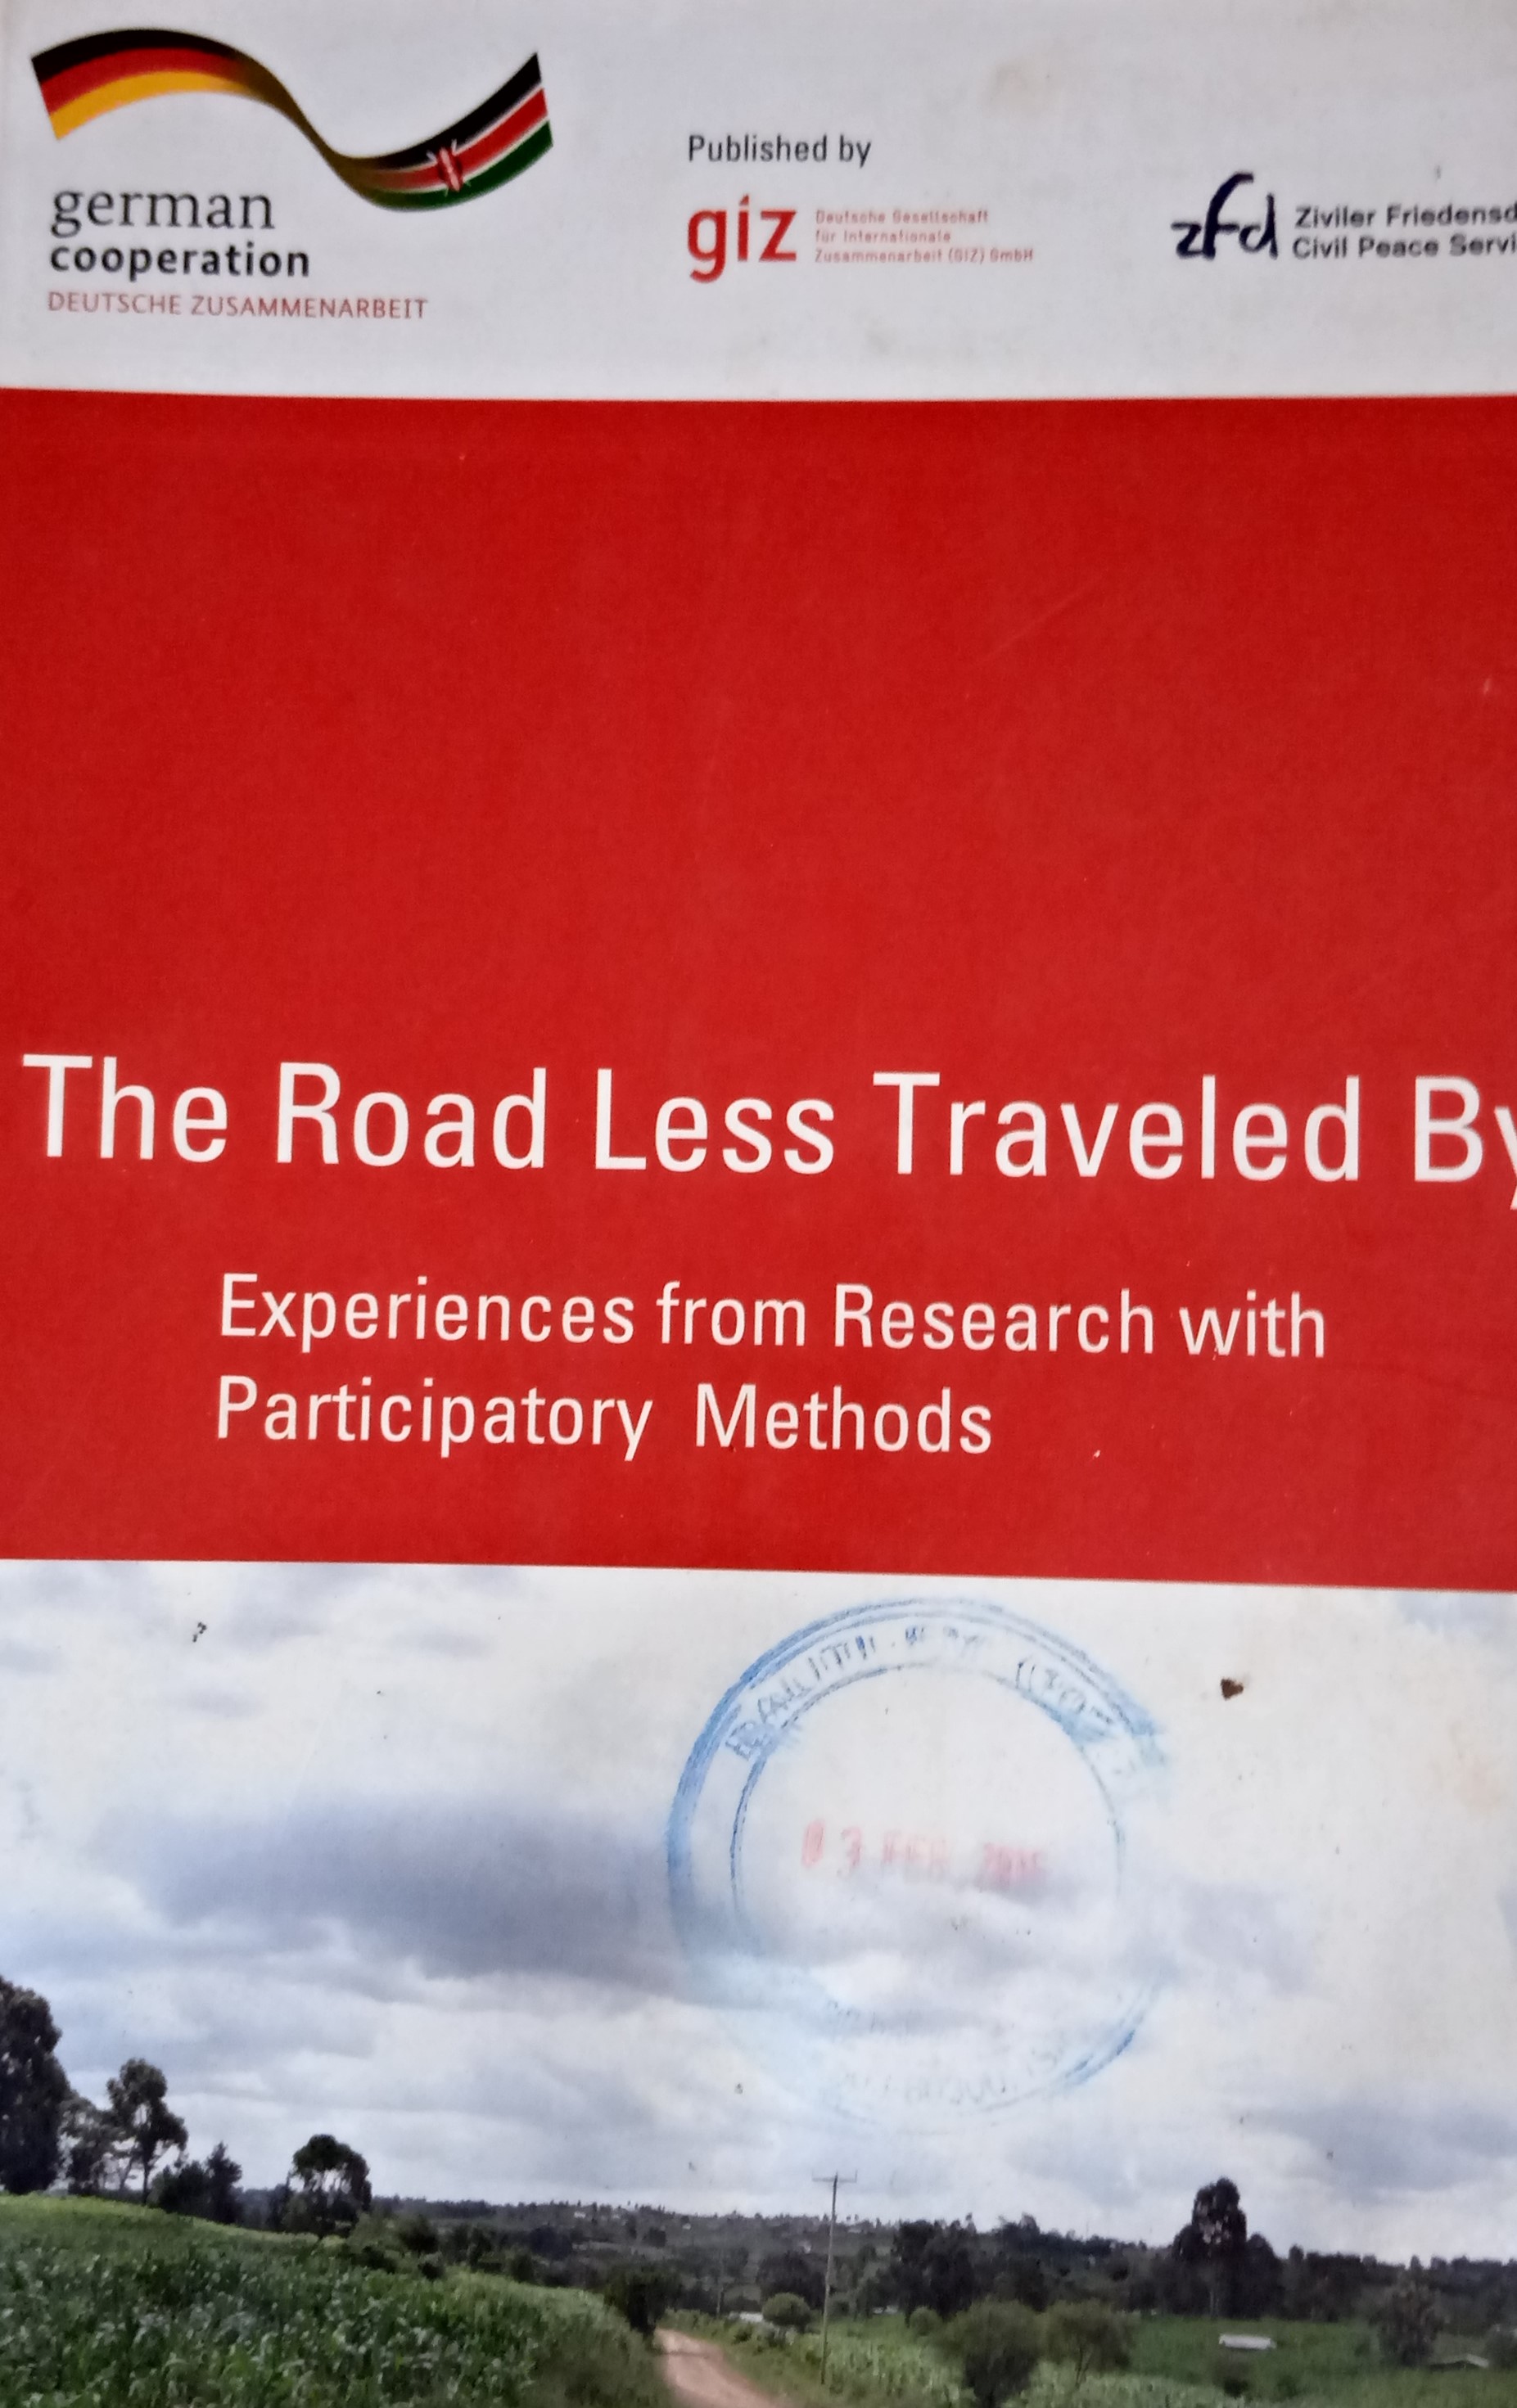 Book Review of the Road Less Traveled: Experiences from research with participatory methods